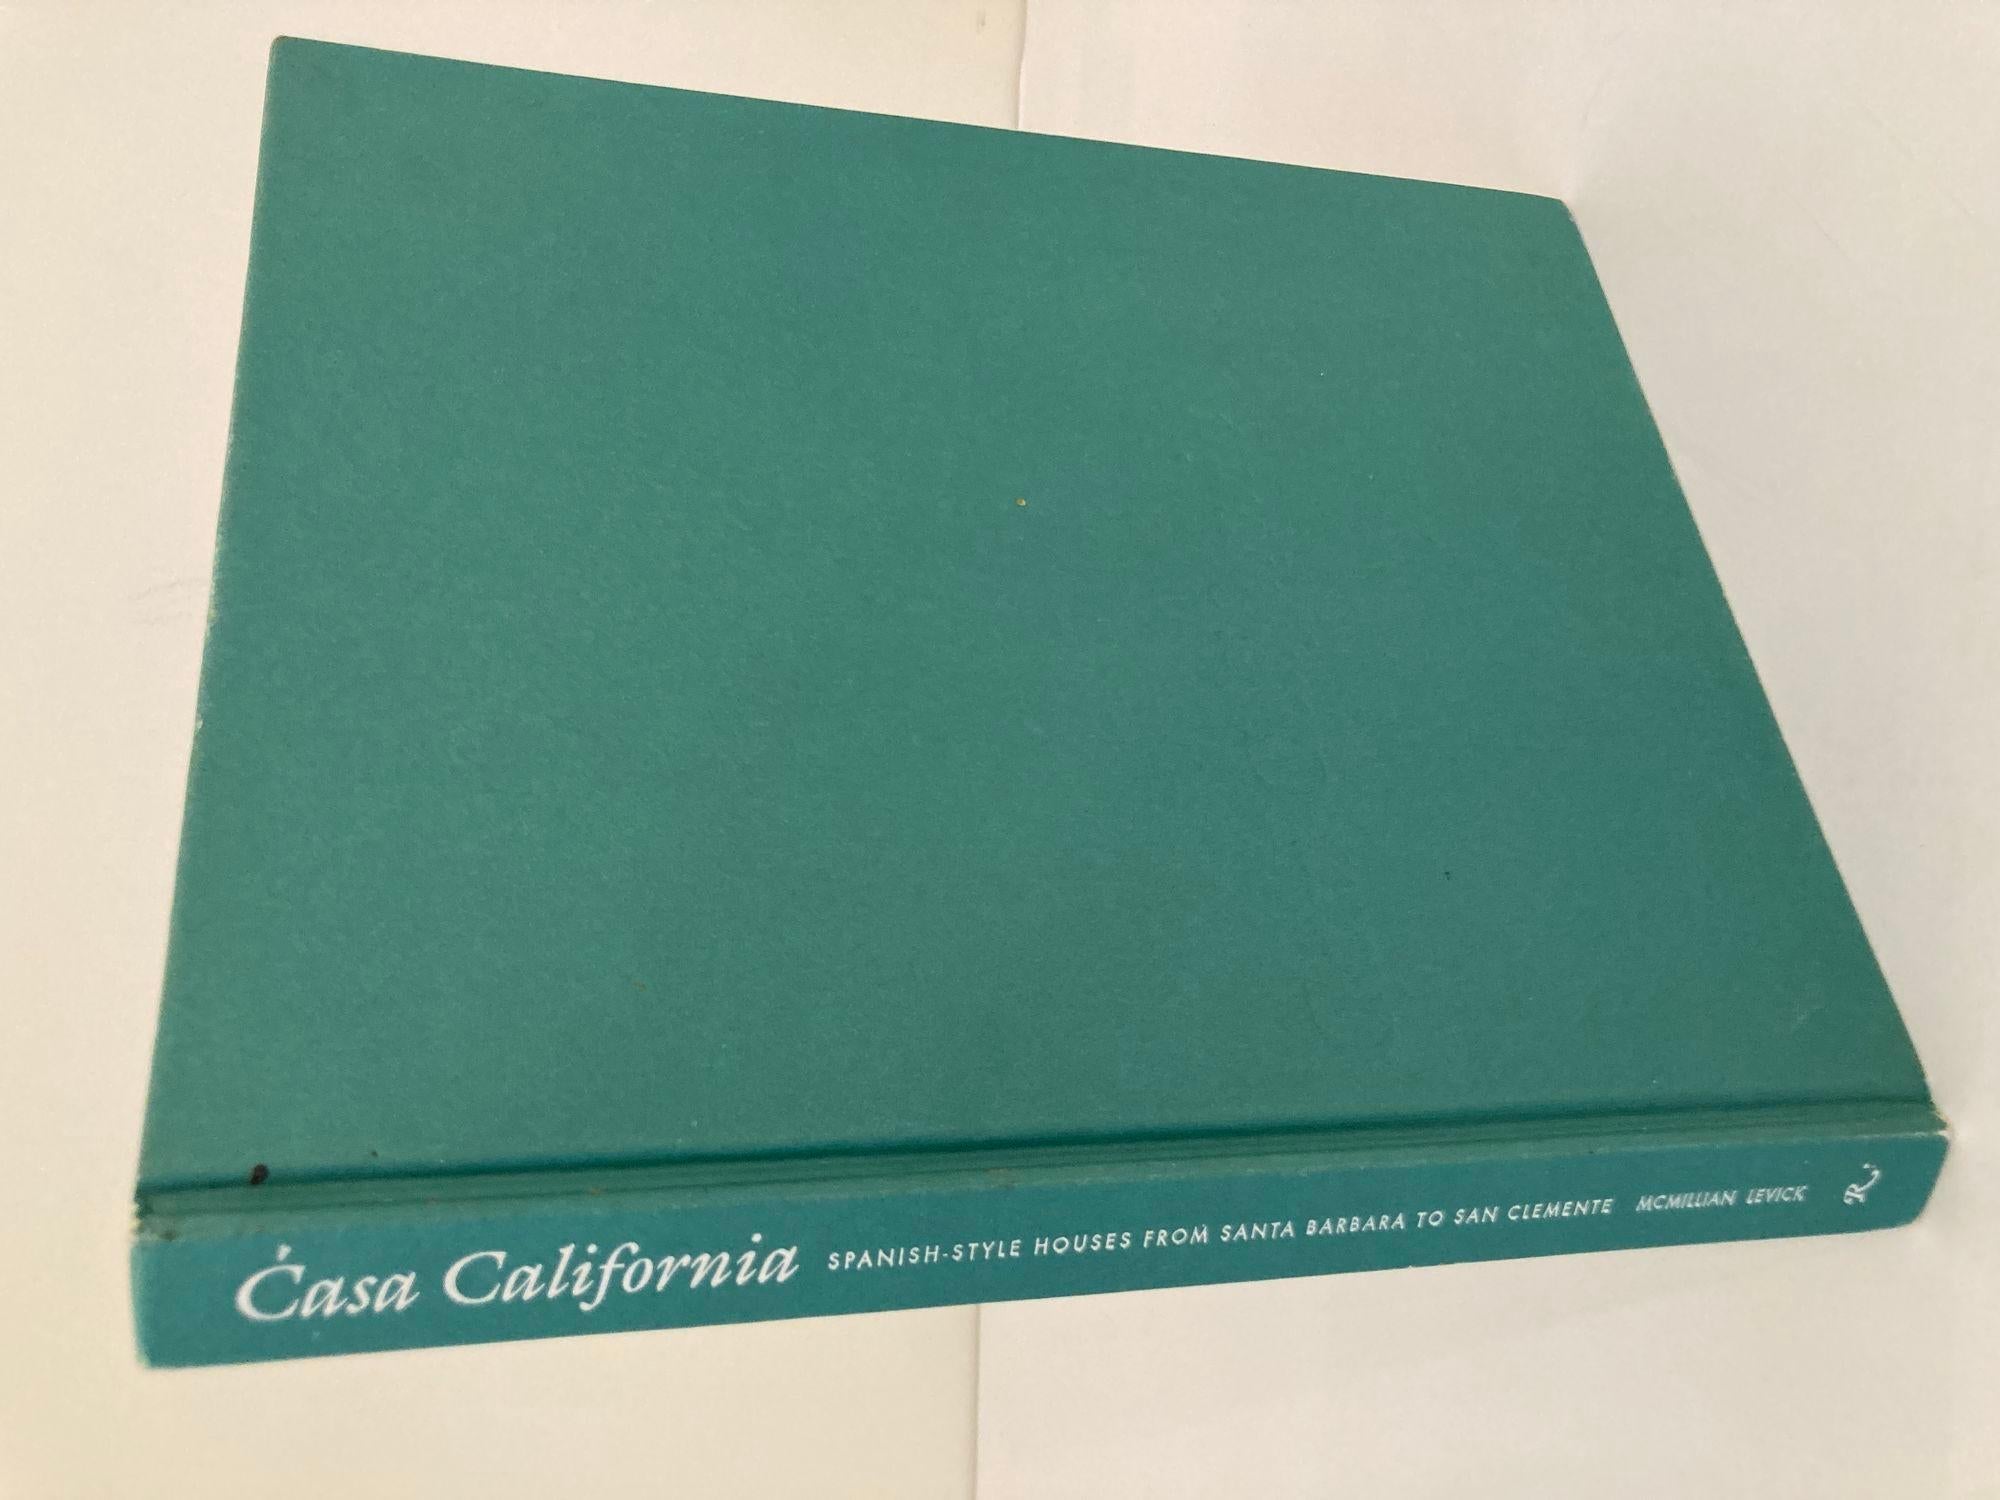 Casa California: Spanish-Style Houses Santa Barbara Hardcover Book.
Signed by Russ Bonto for one of the home owner featured in the book.
Rizzoli 1st edition 1996, 1st Printing.
Missing dustcover
Casa California: Spanish-Style Houses from Santa